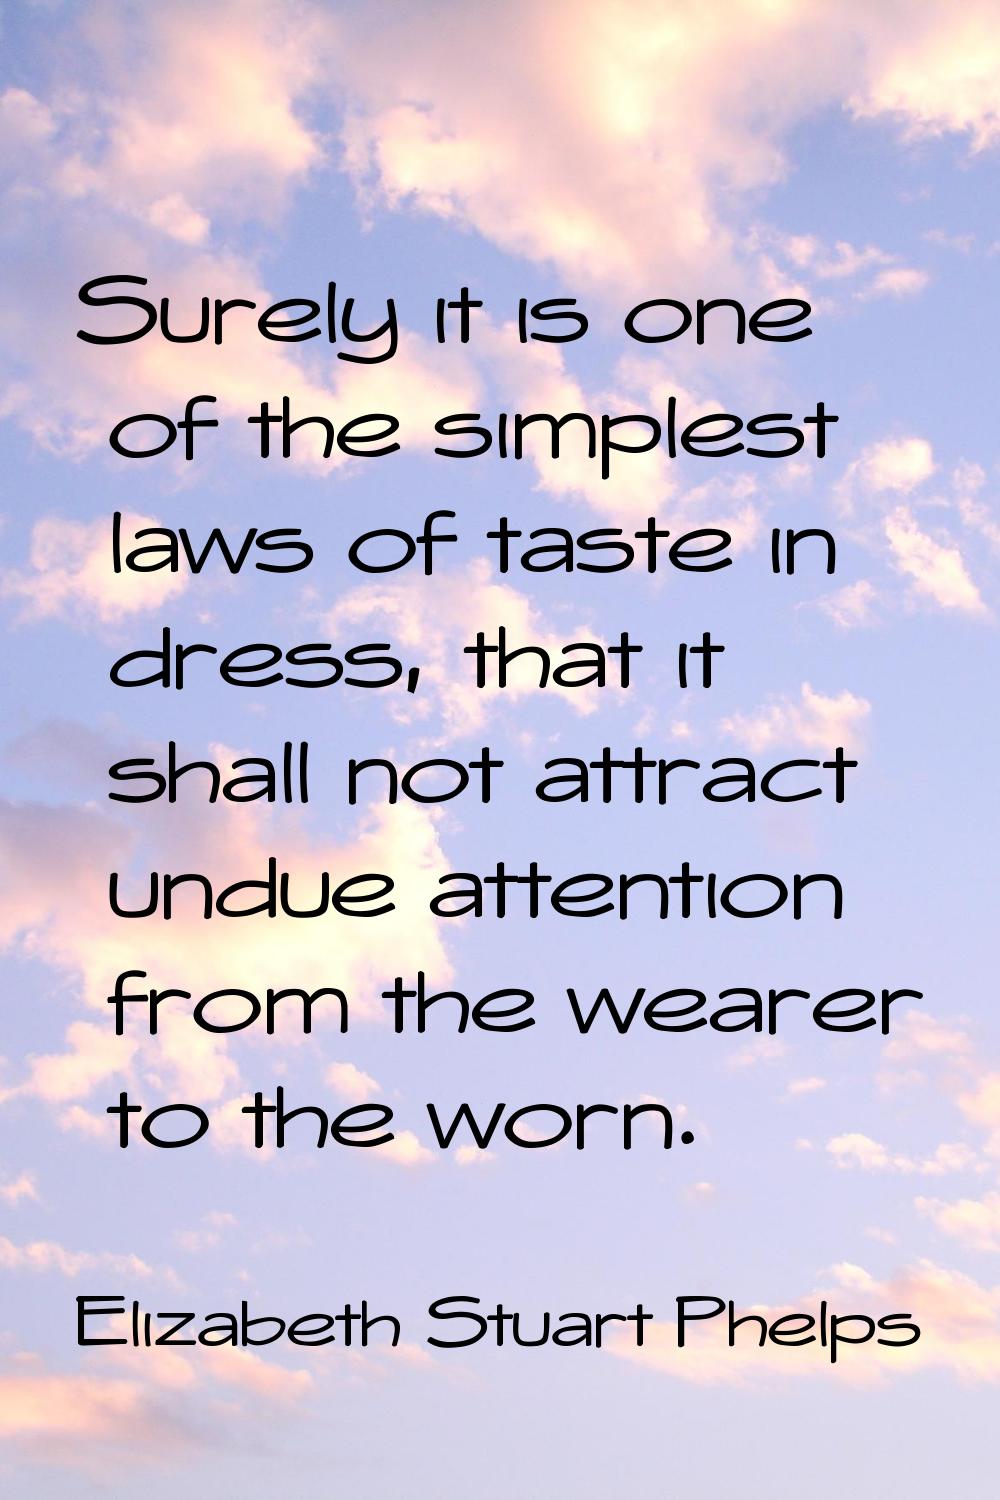 Surely it is one of the simplest laws of taste in dress, that it shall not attract undue attention 